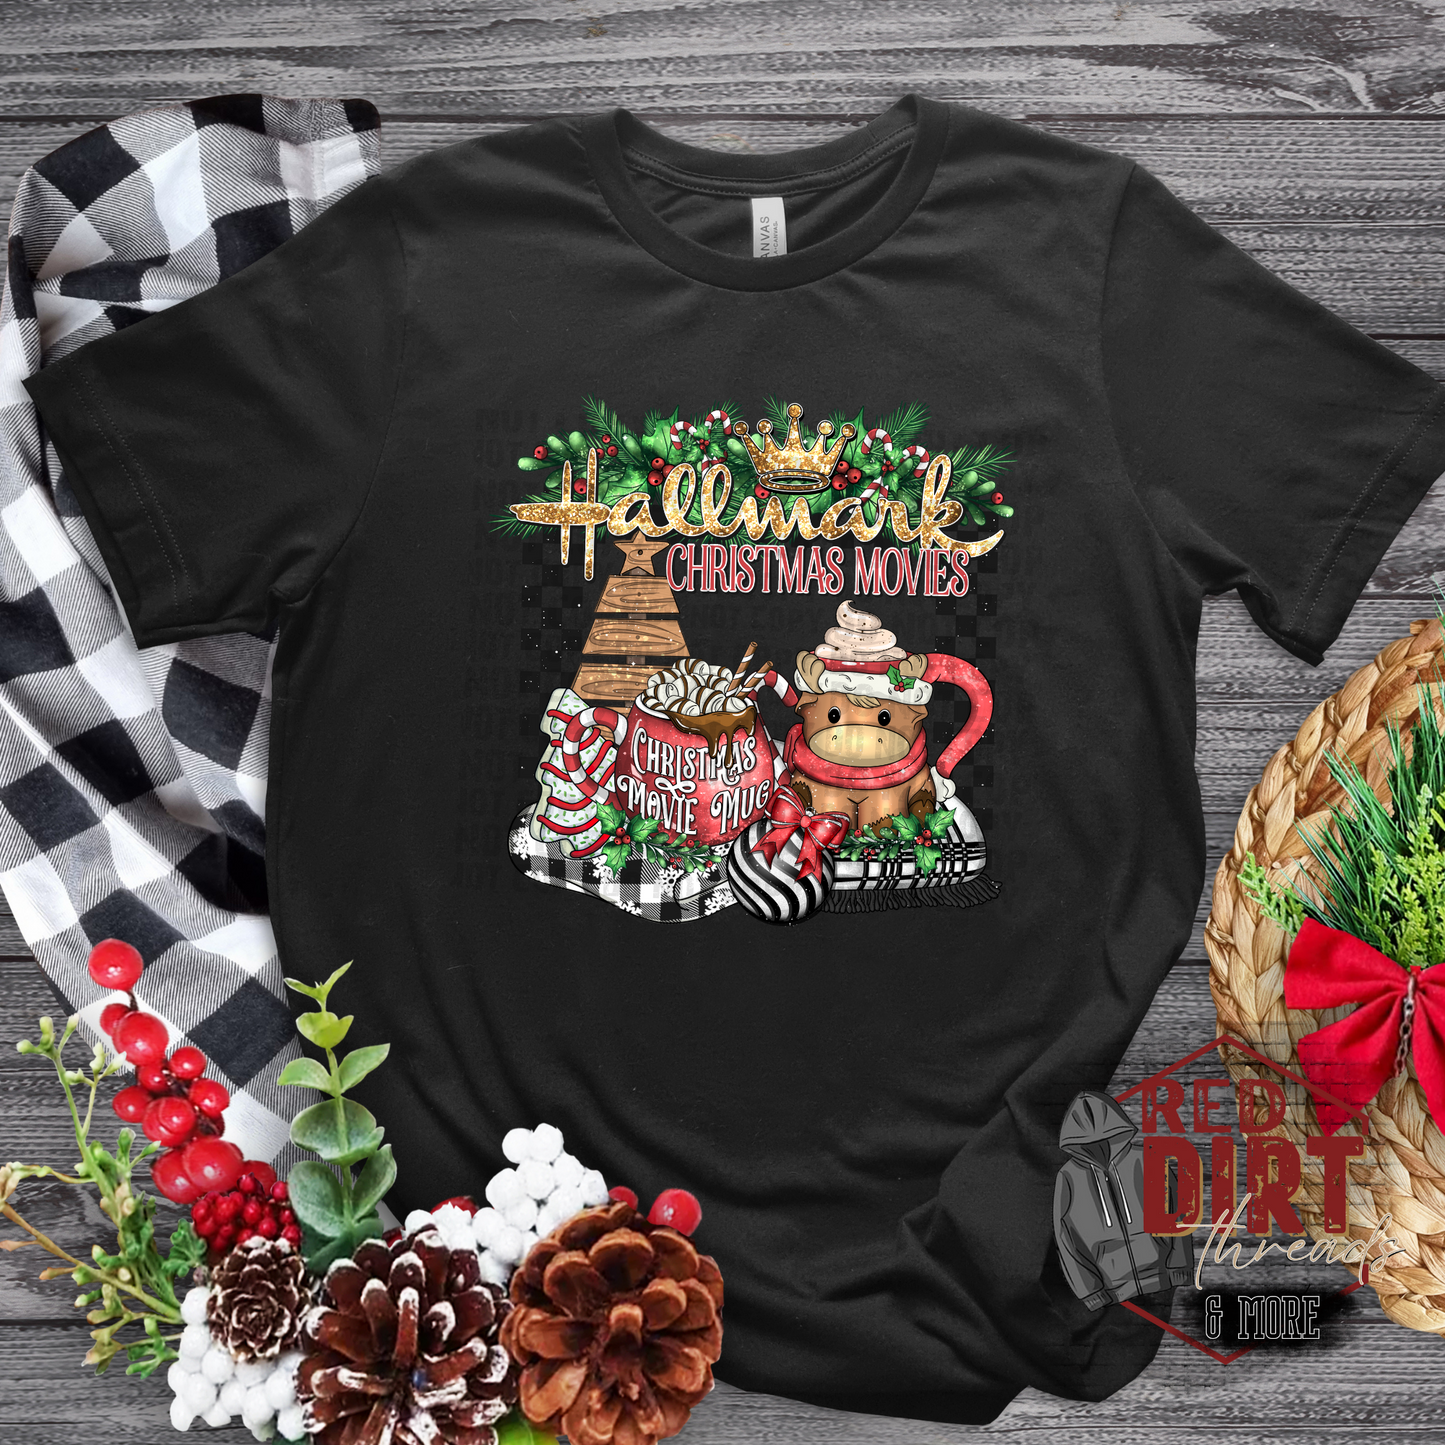 Christmas Movies and Hot Cocoa T-Shirt | Cute Christmas Shirt | Fast Shipping | Super Soft Shirts for Women/Kid's